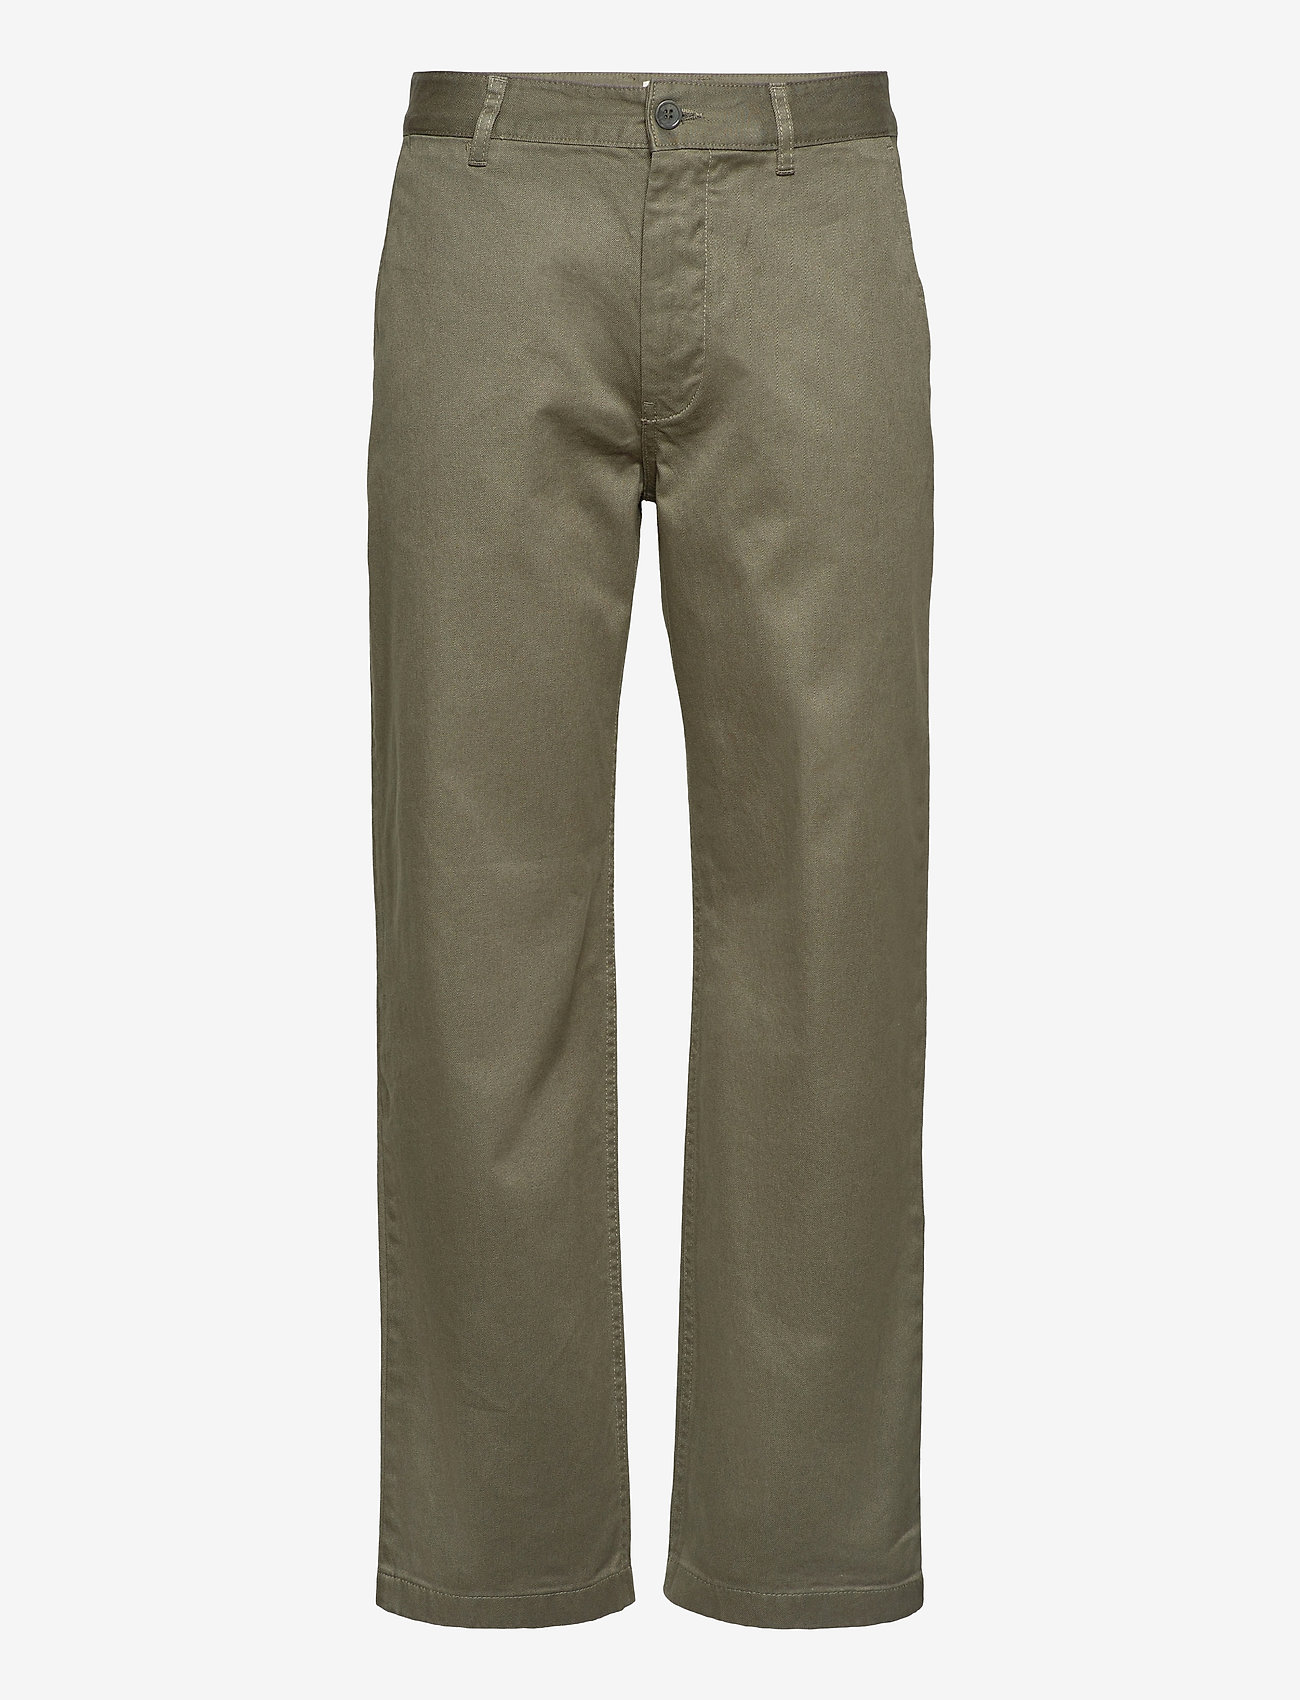 Wood Wood - Stefan classic trousers - chino's - olive - 0